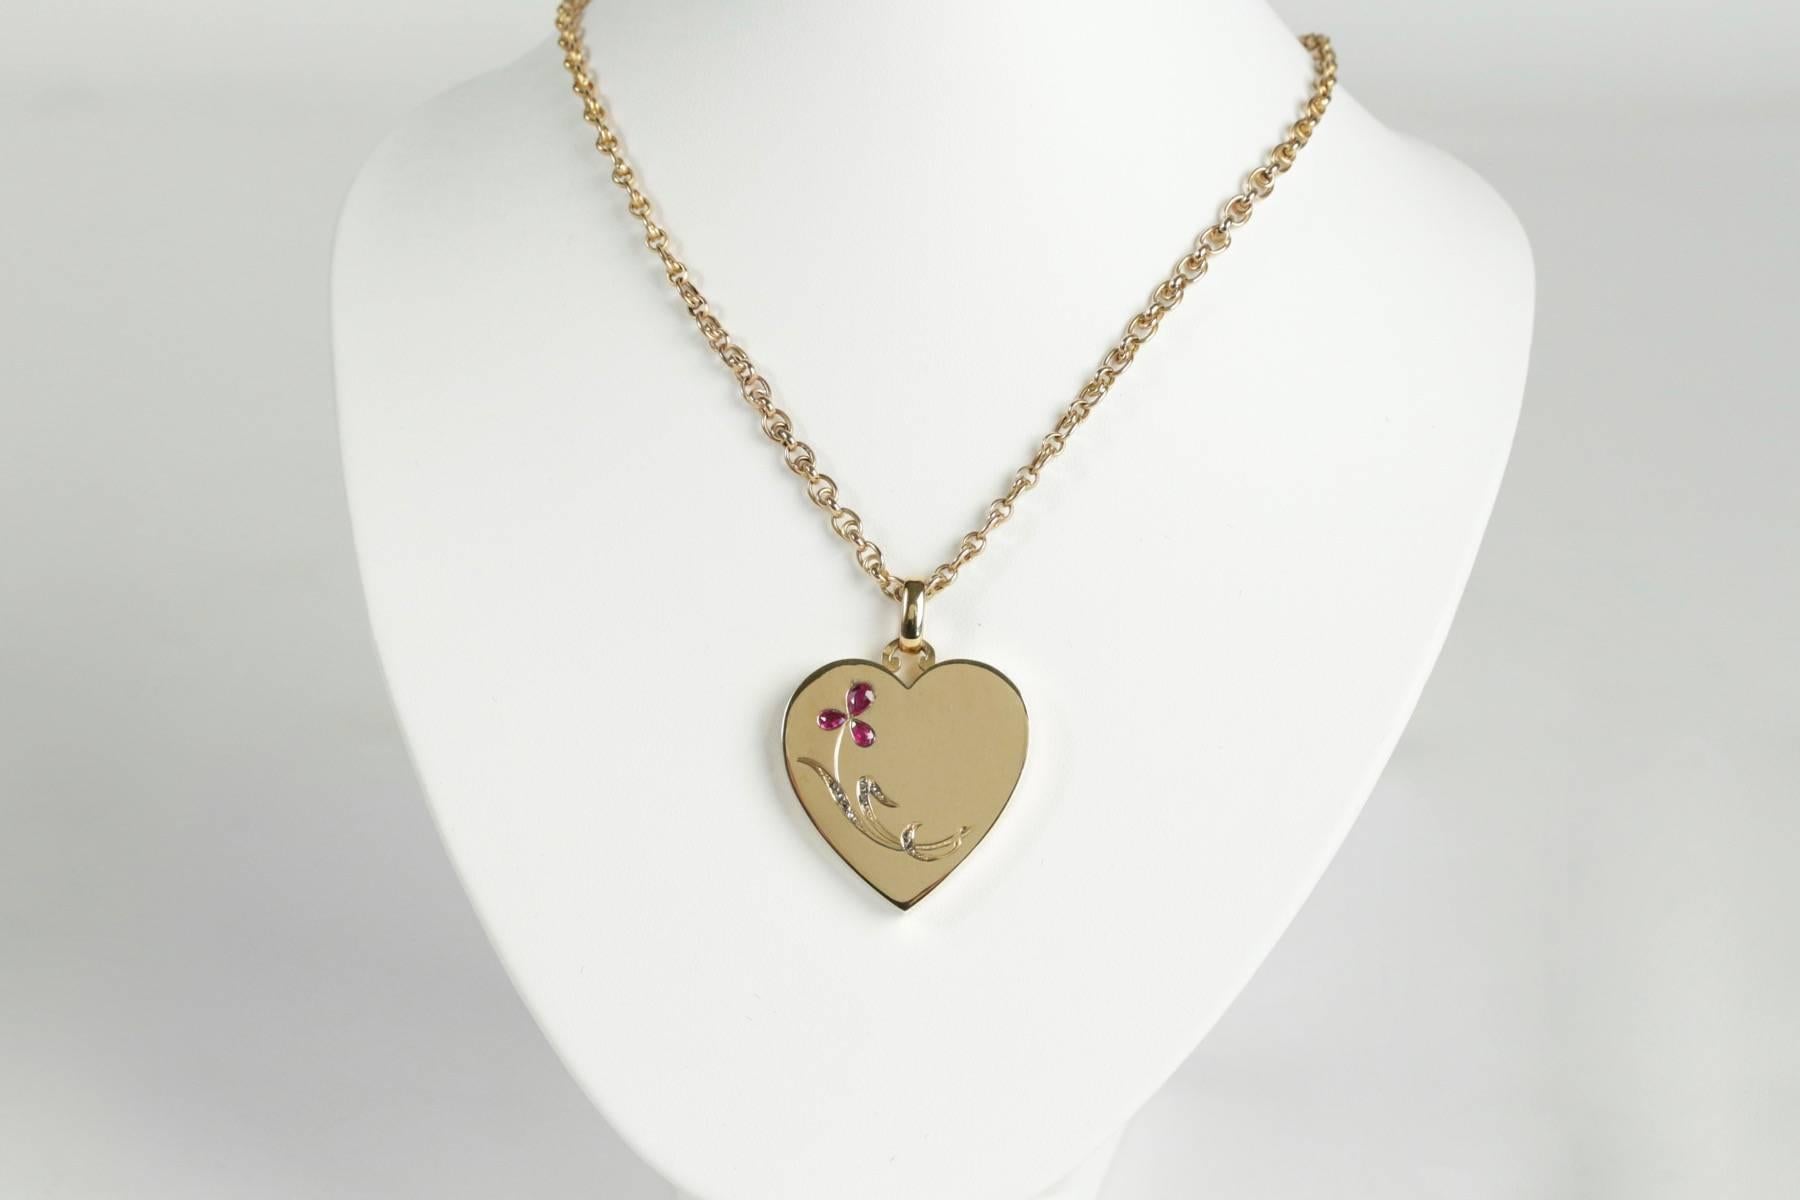 18k yellow gold Heart locket pendant set with ruby and diamonds rose cut, with 18k yellow gold chain necklace. French work. Circa 1880.

Total chain necklace length: 46 cm